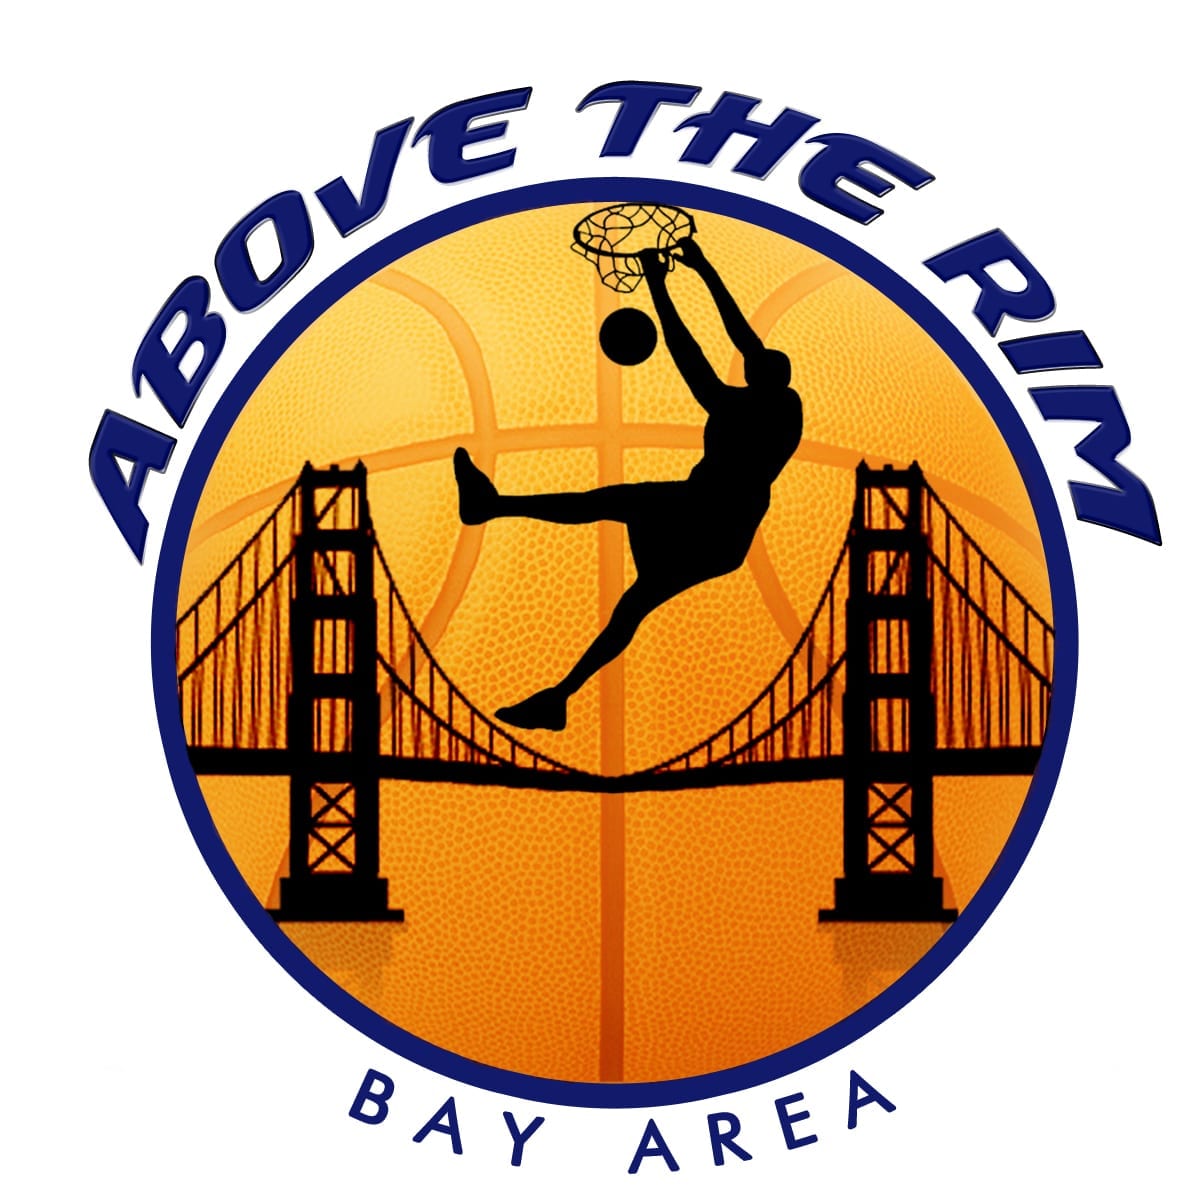 Bay Area Basketball: The Evolution of Our Summer Hoop League